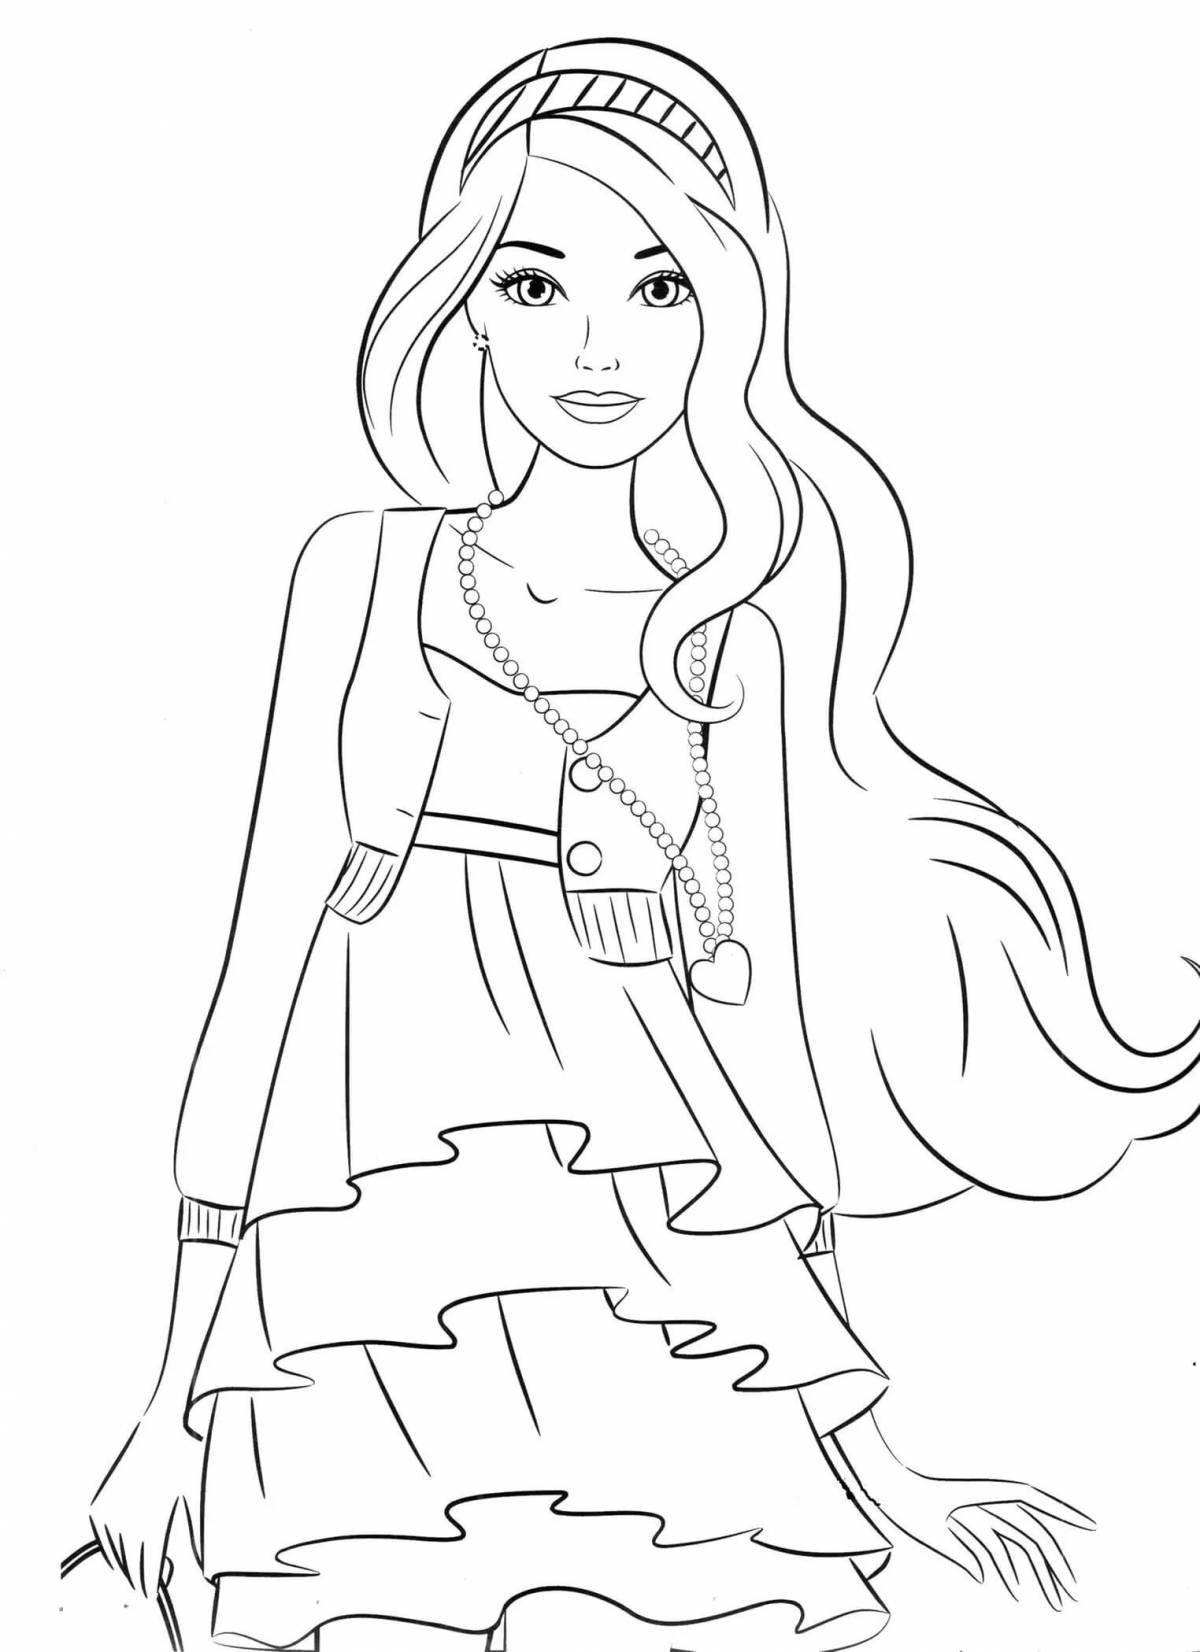 Whimsical Coloring Pages for Girls 10 Years Old